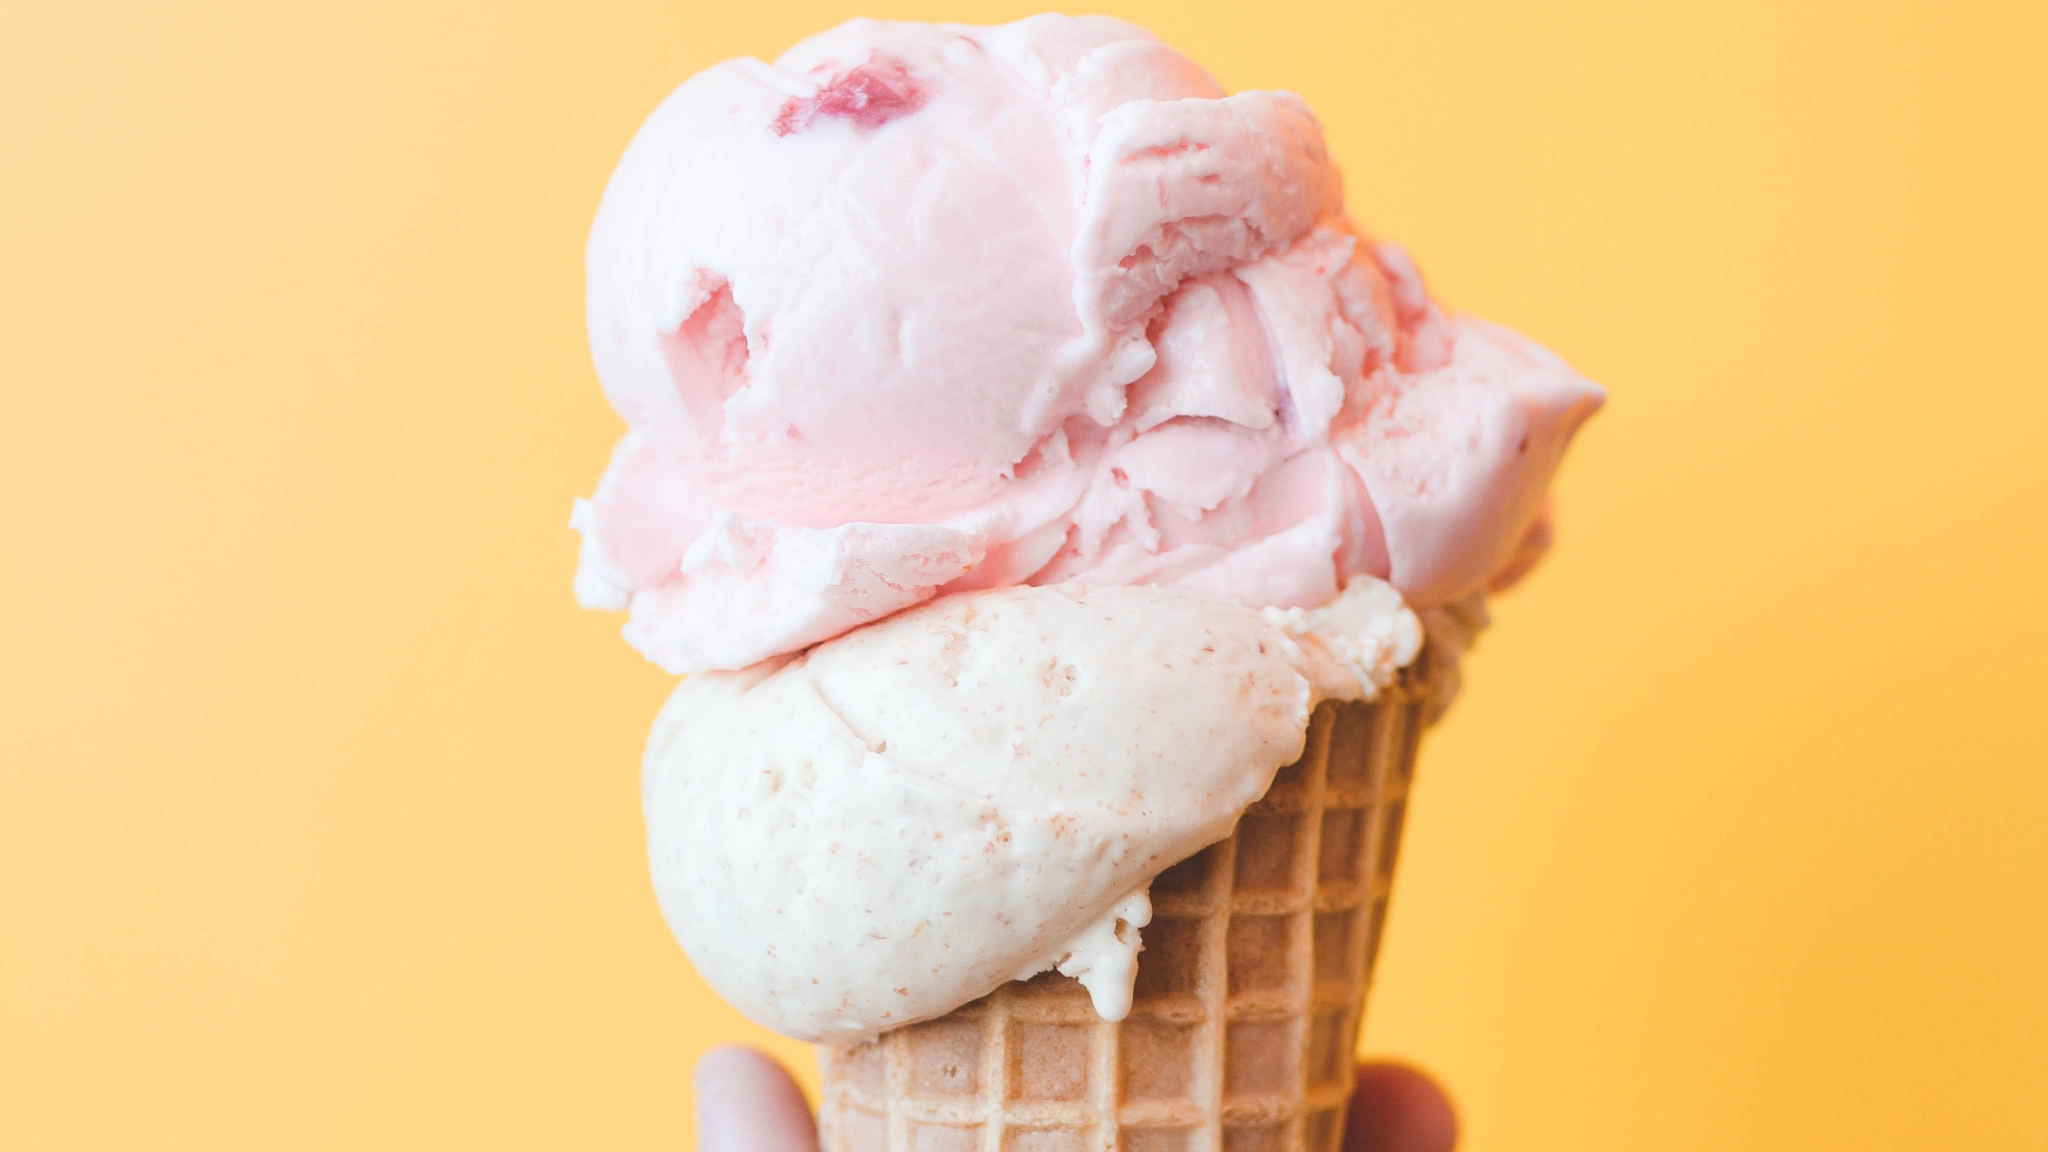 Lick Ice Cream to open a third location at The Rim - San Antonio Business  Journal